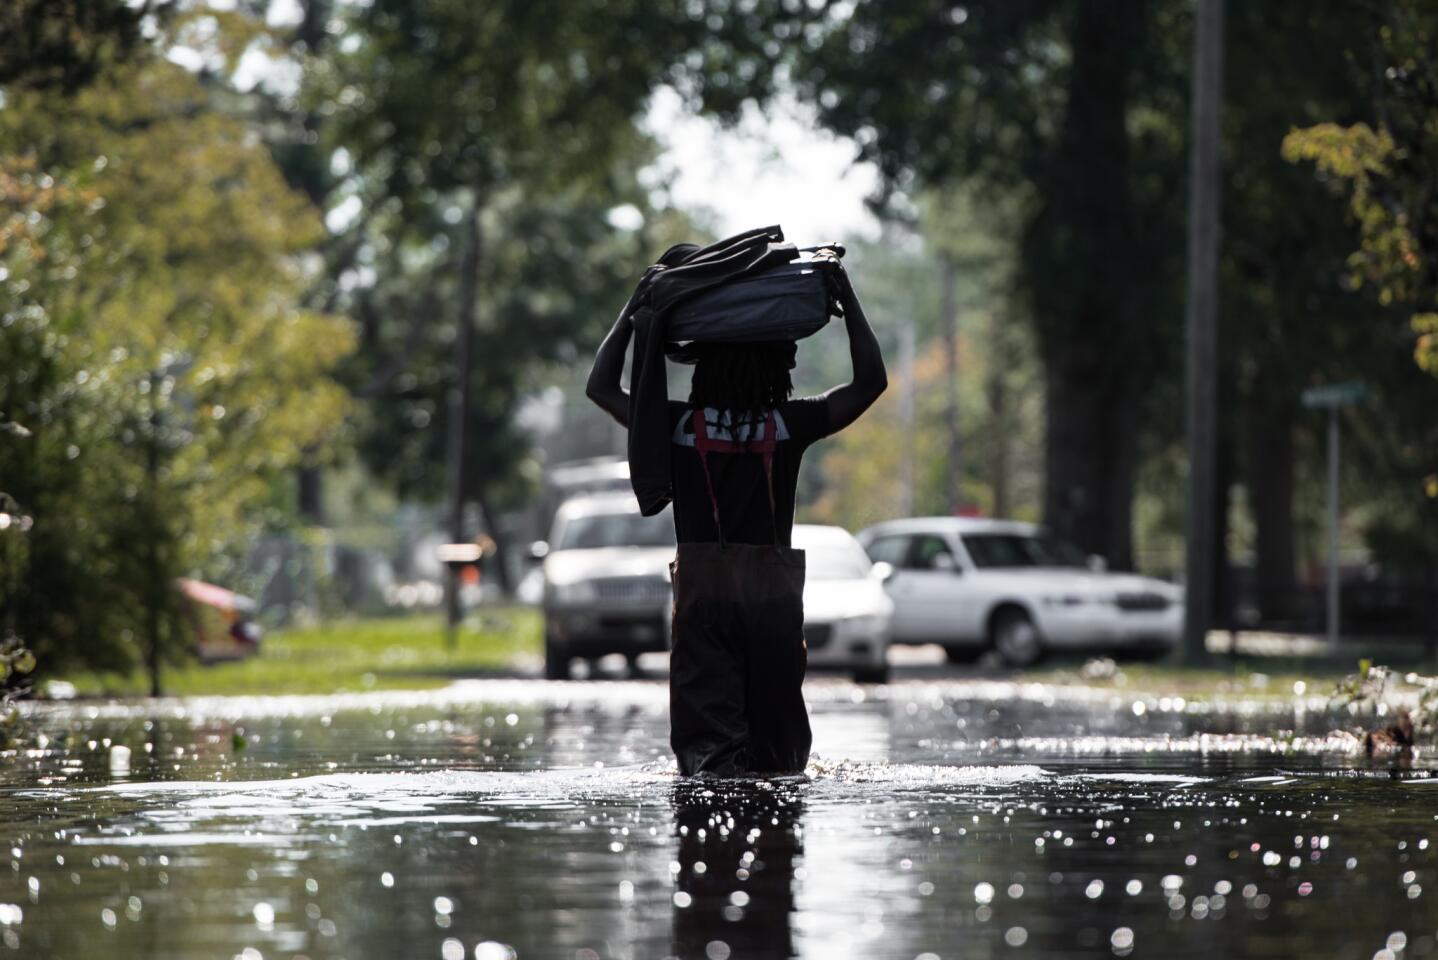 A man carries personal items through a flooded street caused by remnants of Hurricane Matthew on Oct. 11, 2016 in Fair Bluff, North Carolina.